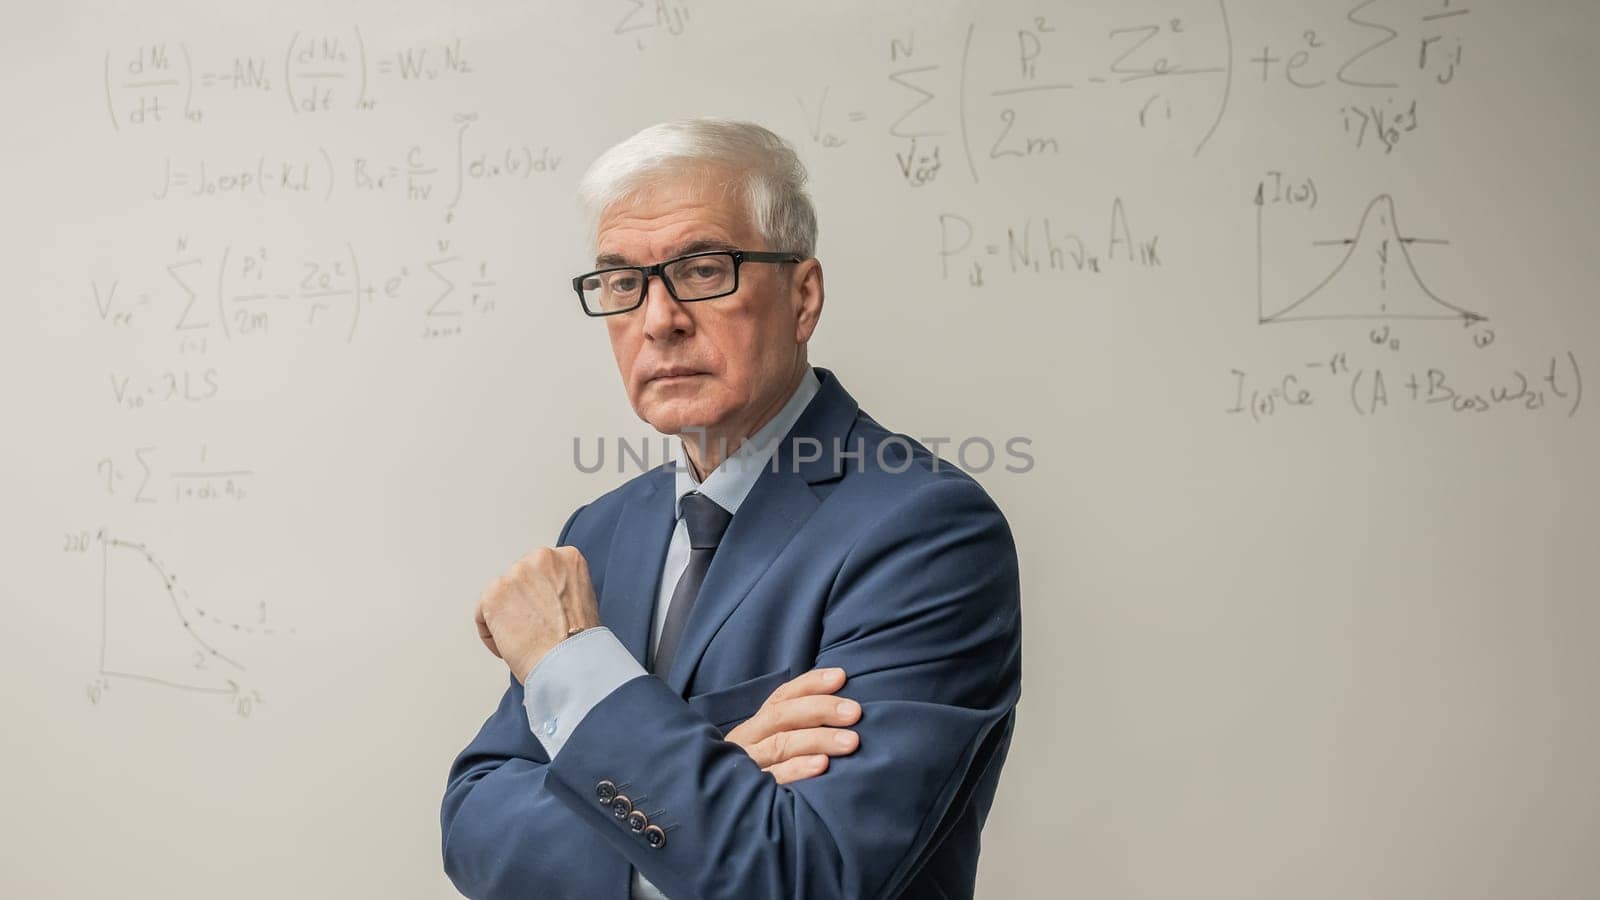 Mature man stands at a white board with written formulas. by mrwed54